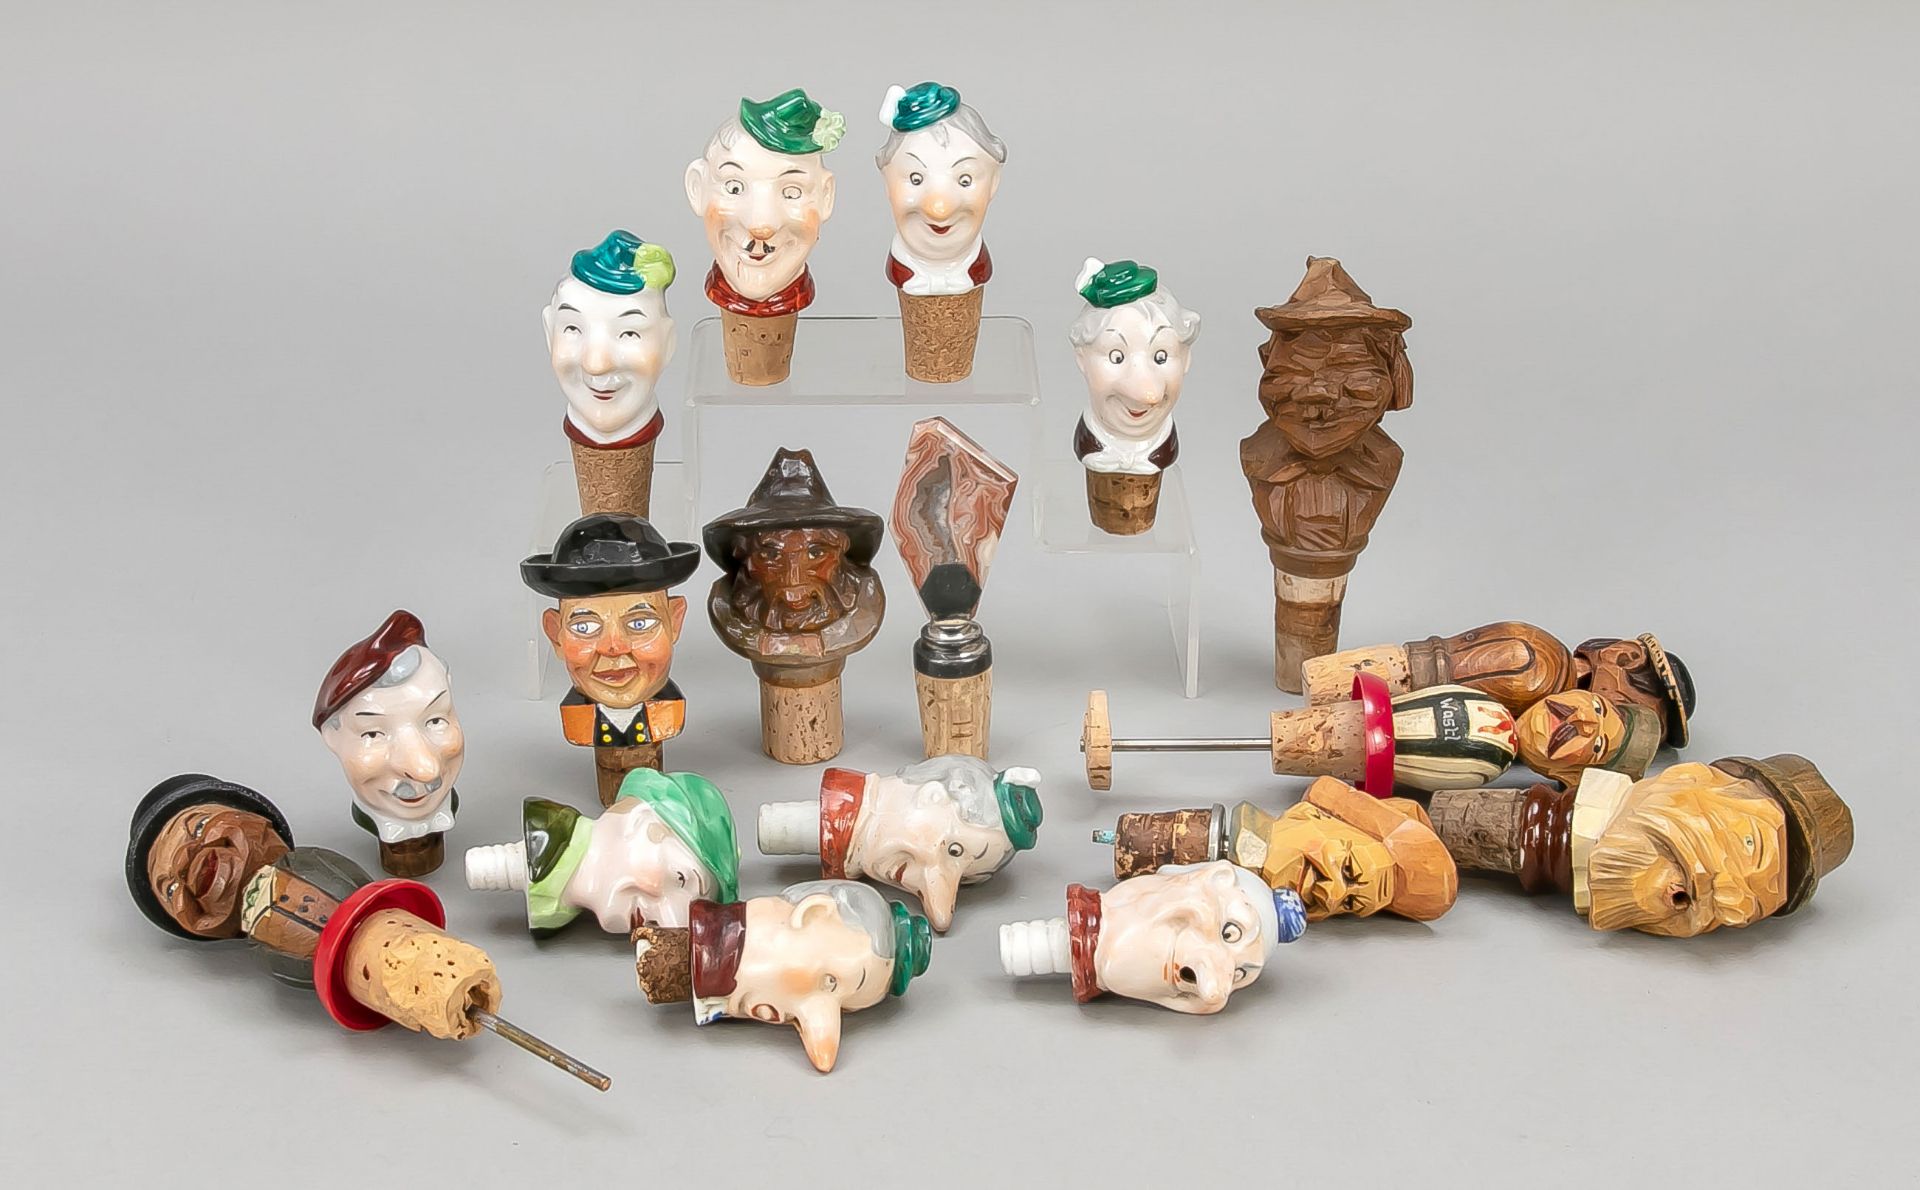 Mixed lot of figural stoppers (ca. 18 pieces), 20th c., ceramic/porcelain polychrome glazed and wood